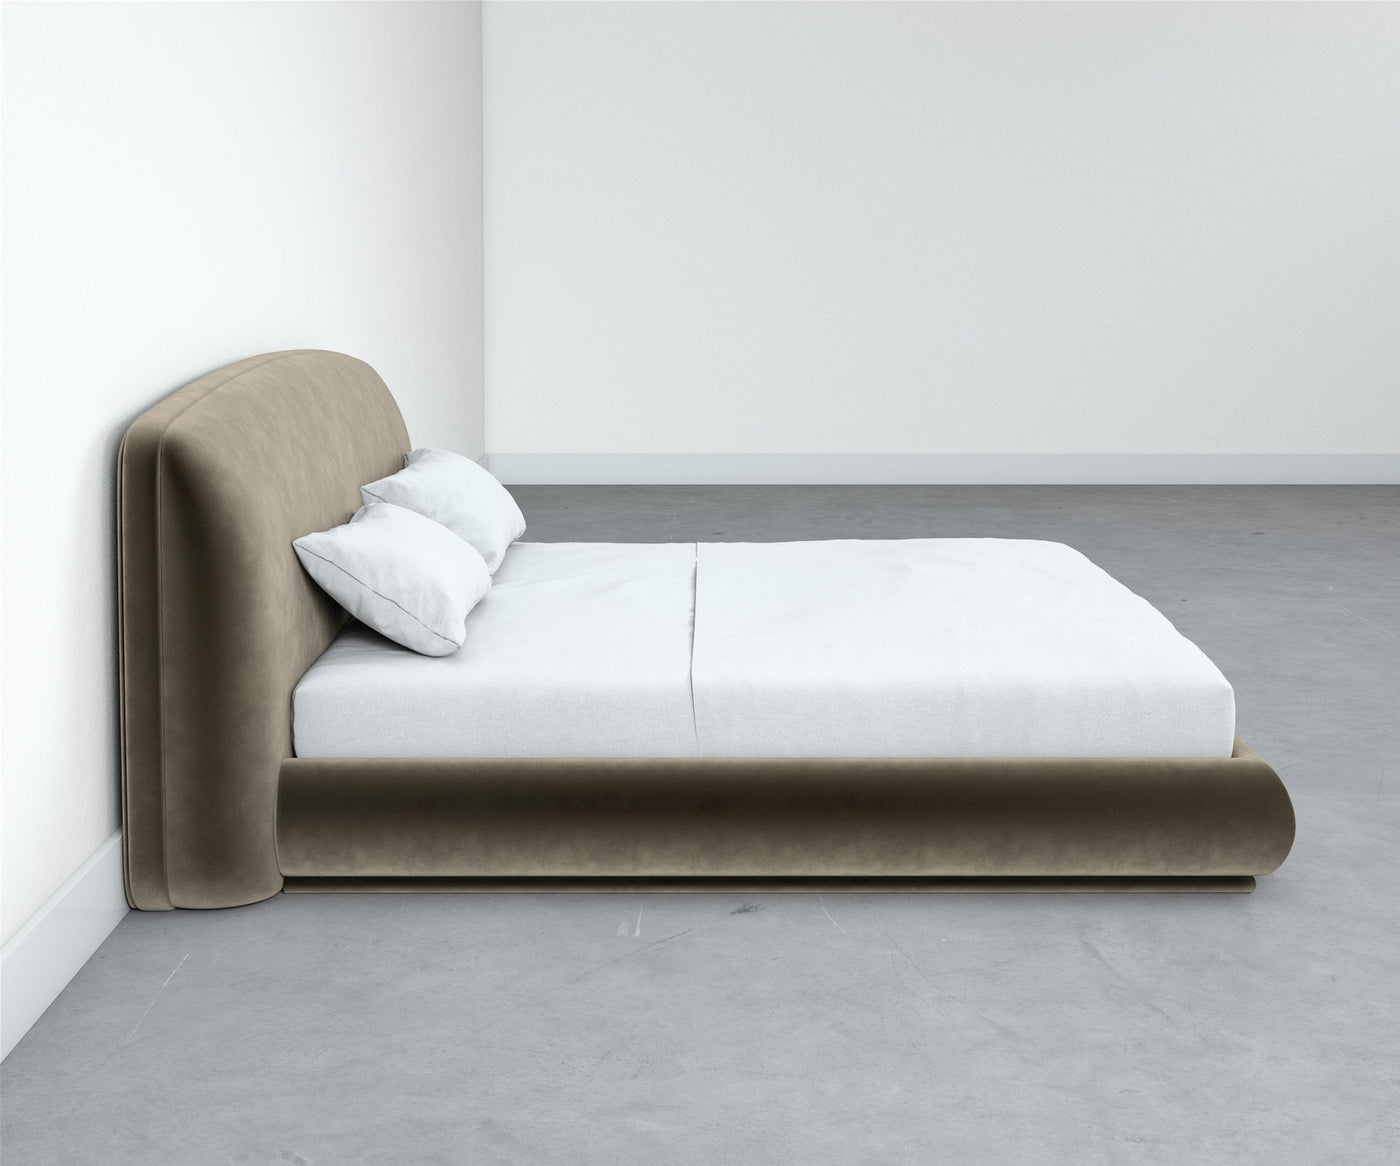 Mallo Bed - Beds